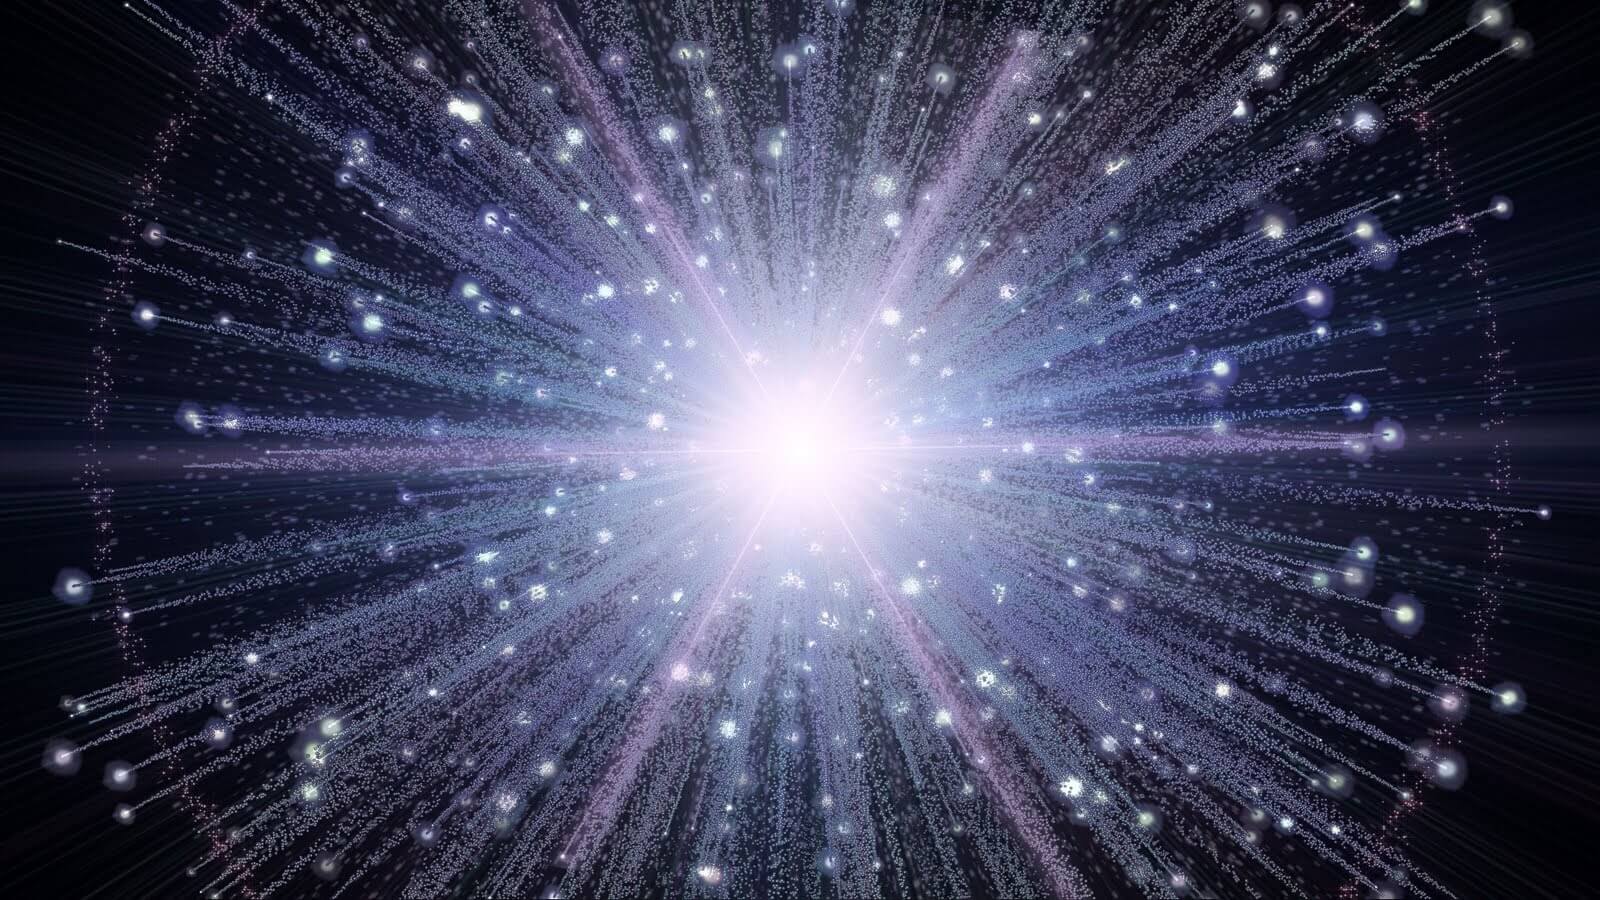 The researchers found a possible cause of the Big Bang